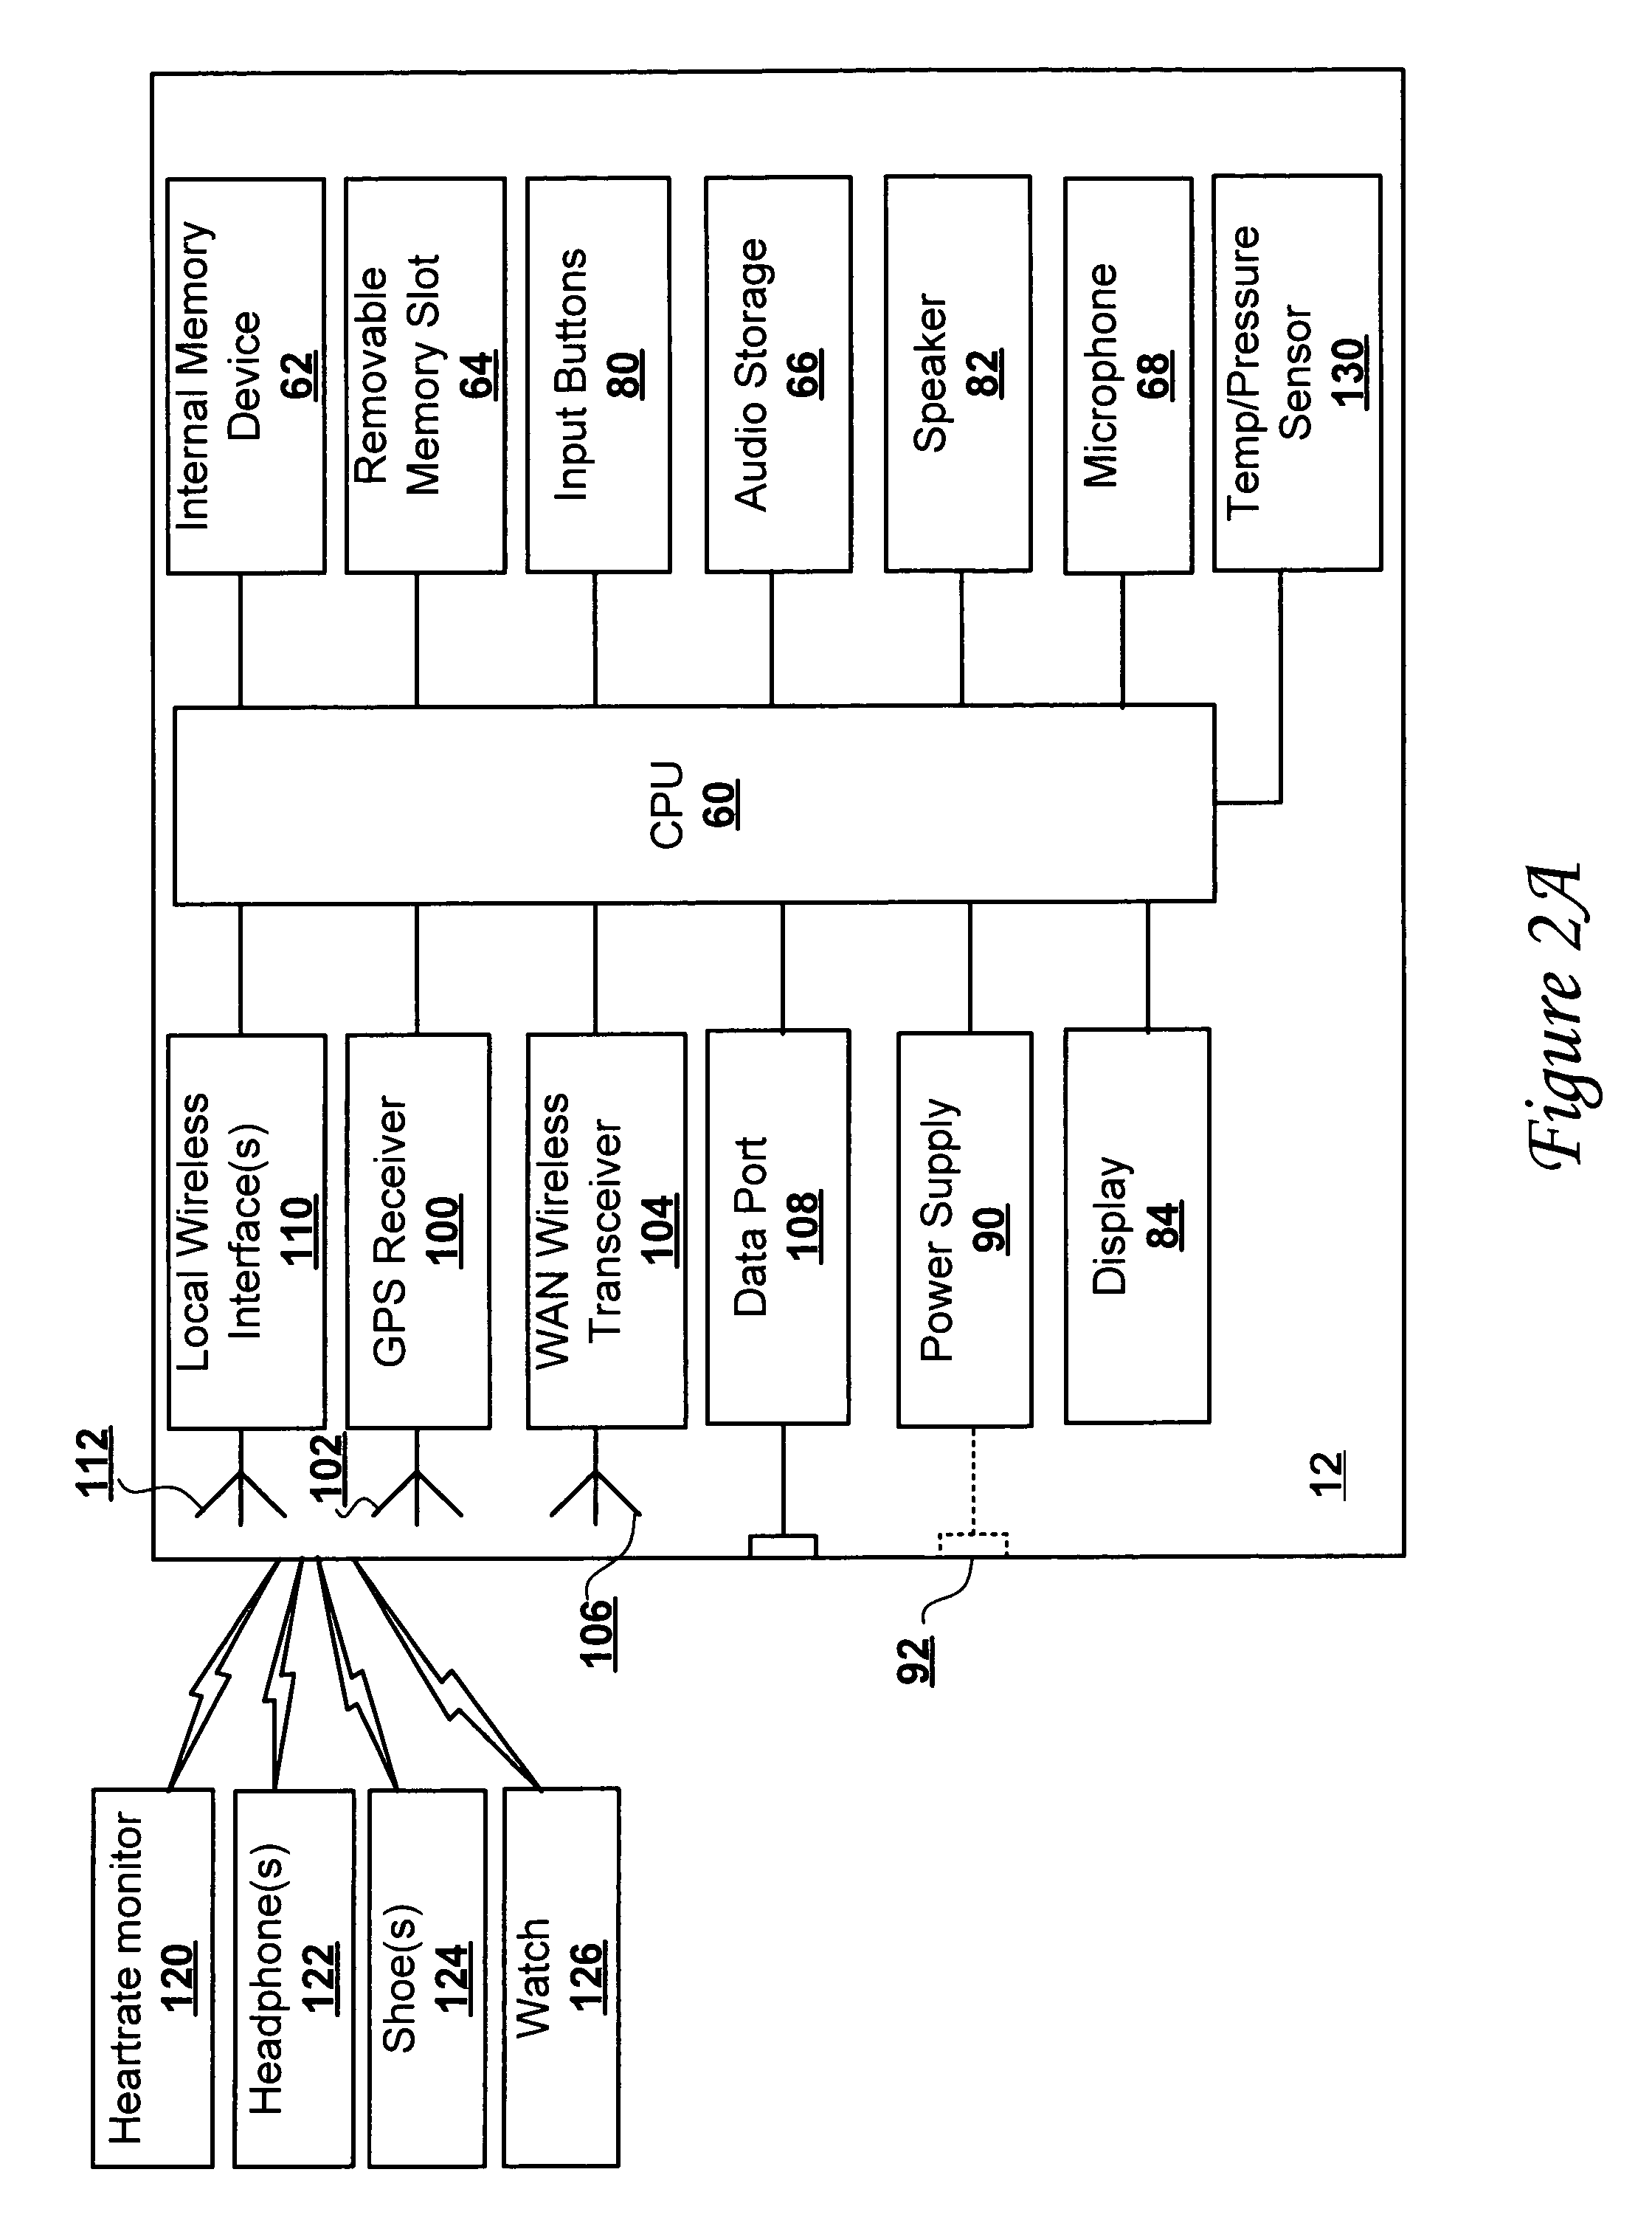 Location-aware fitness training device, methods, and program products that support real-time interactive communication and automated route generation